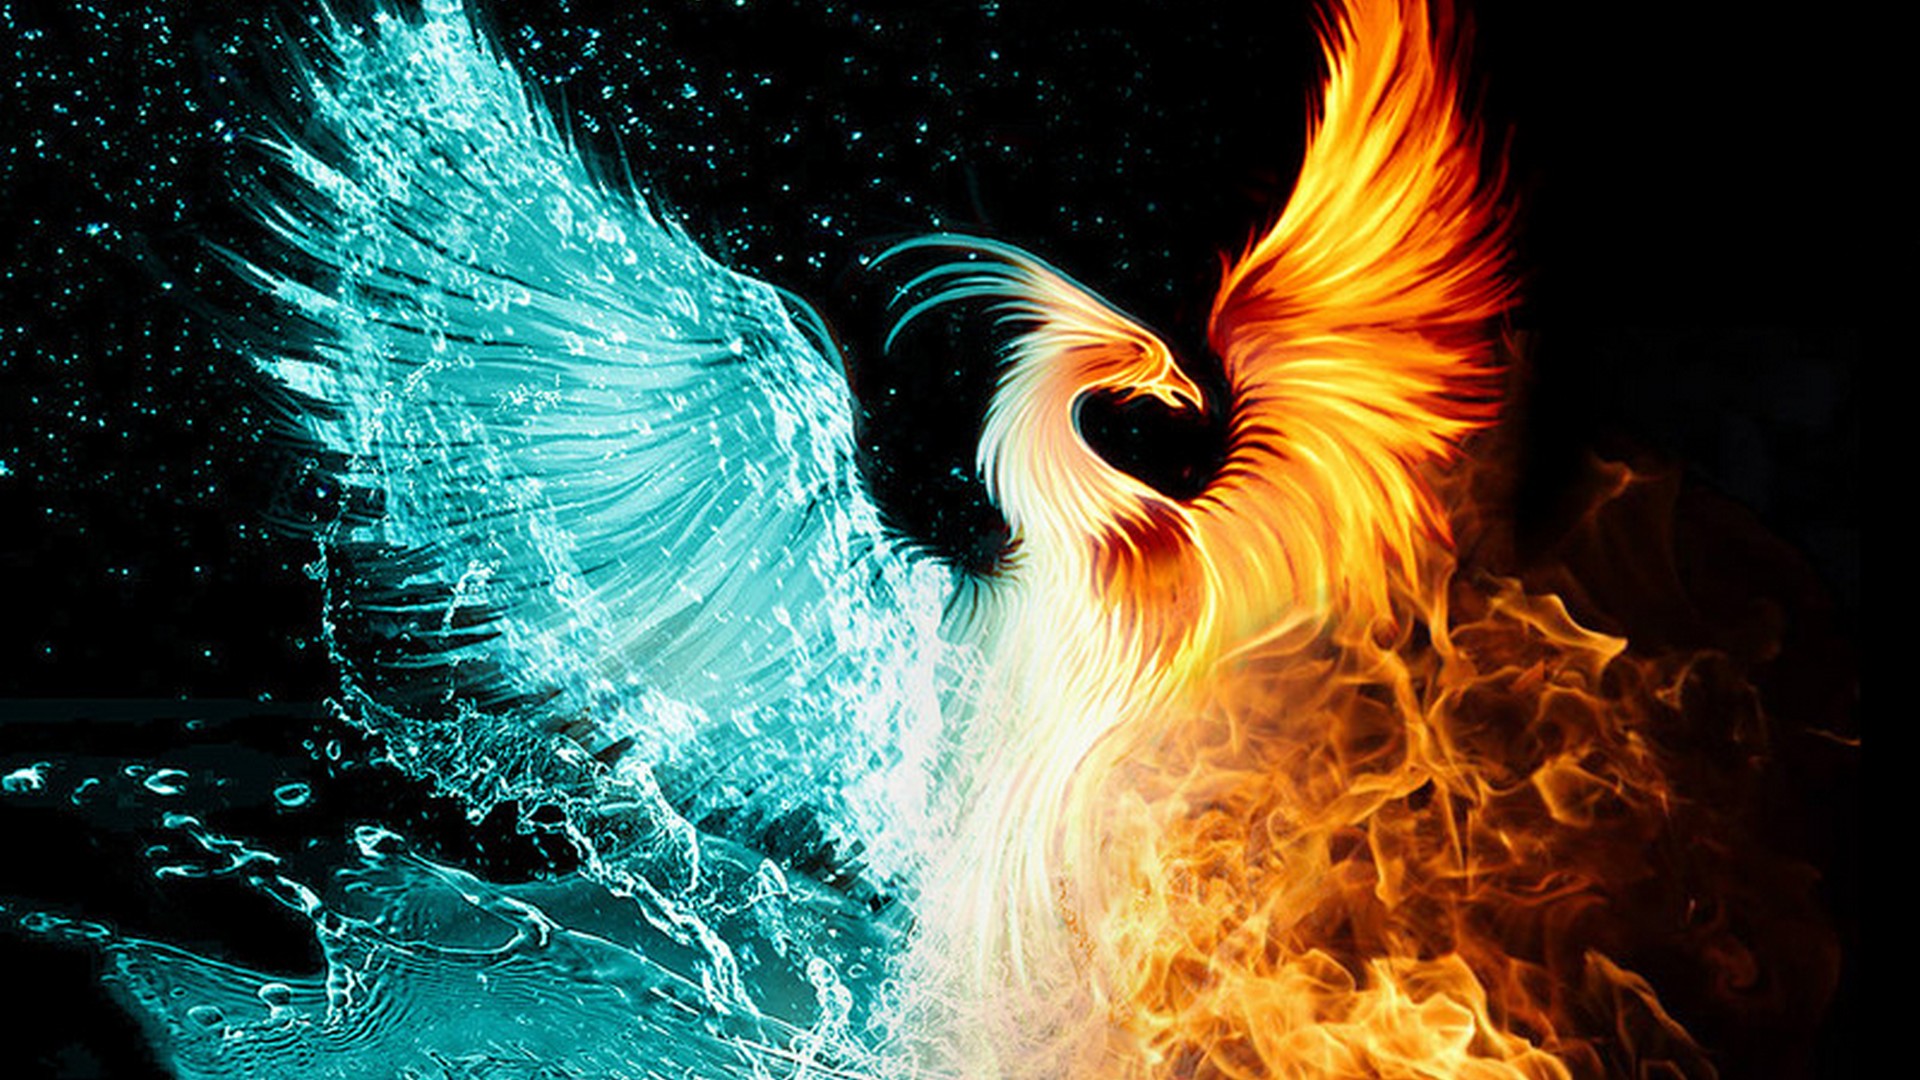 Wallpaper Phoenix Bird with resolution 1920X1080 pixel. You can use this wallpaper as background for your desktop Computer Screensavers, Android or iPhone smartphones